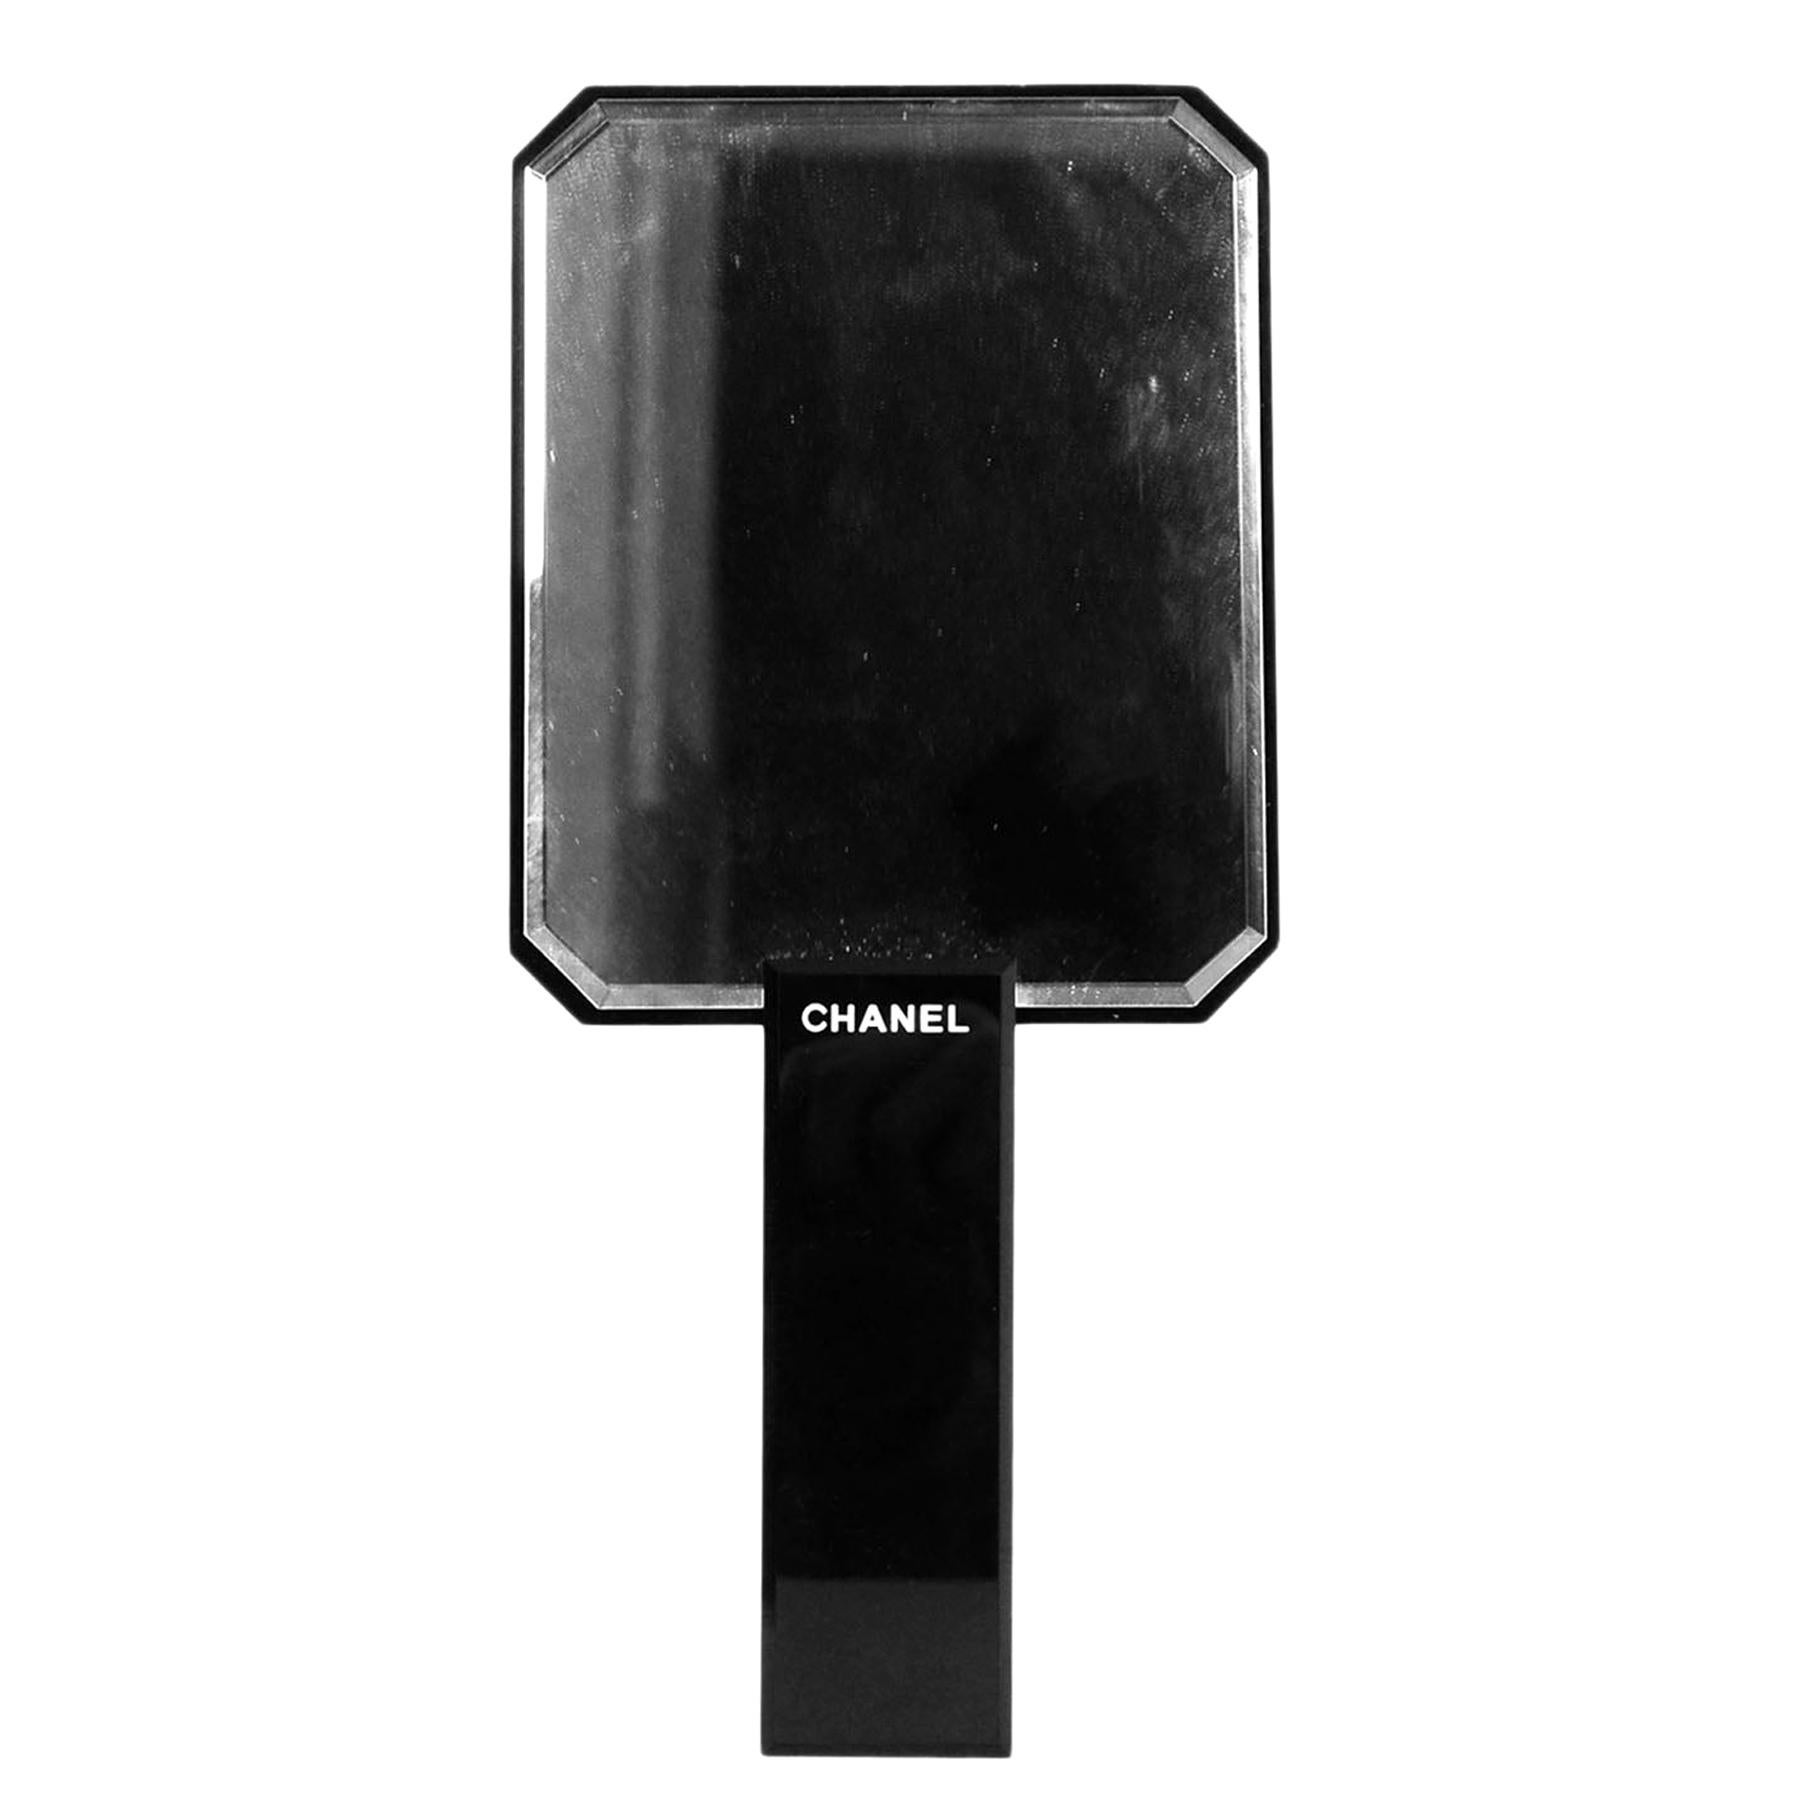 Chanel Black CC Hand Mirror

Color: Black
Materials: Acetate, glass
Overall Condition: Very good pre-owned condition, with a scratch to logo
Includes: Foam protector 

Measurements: 
4.5